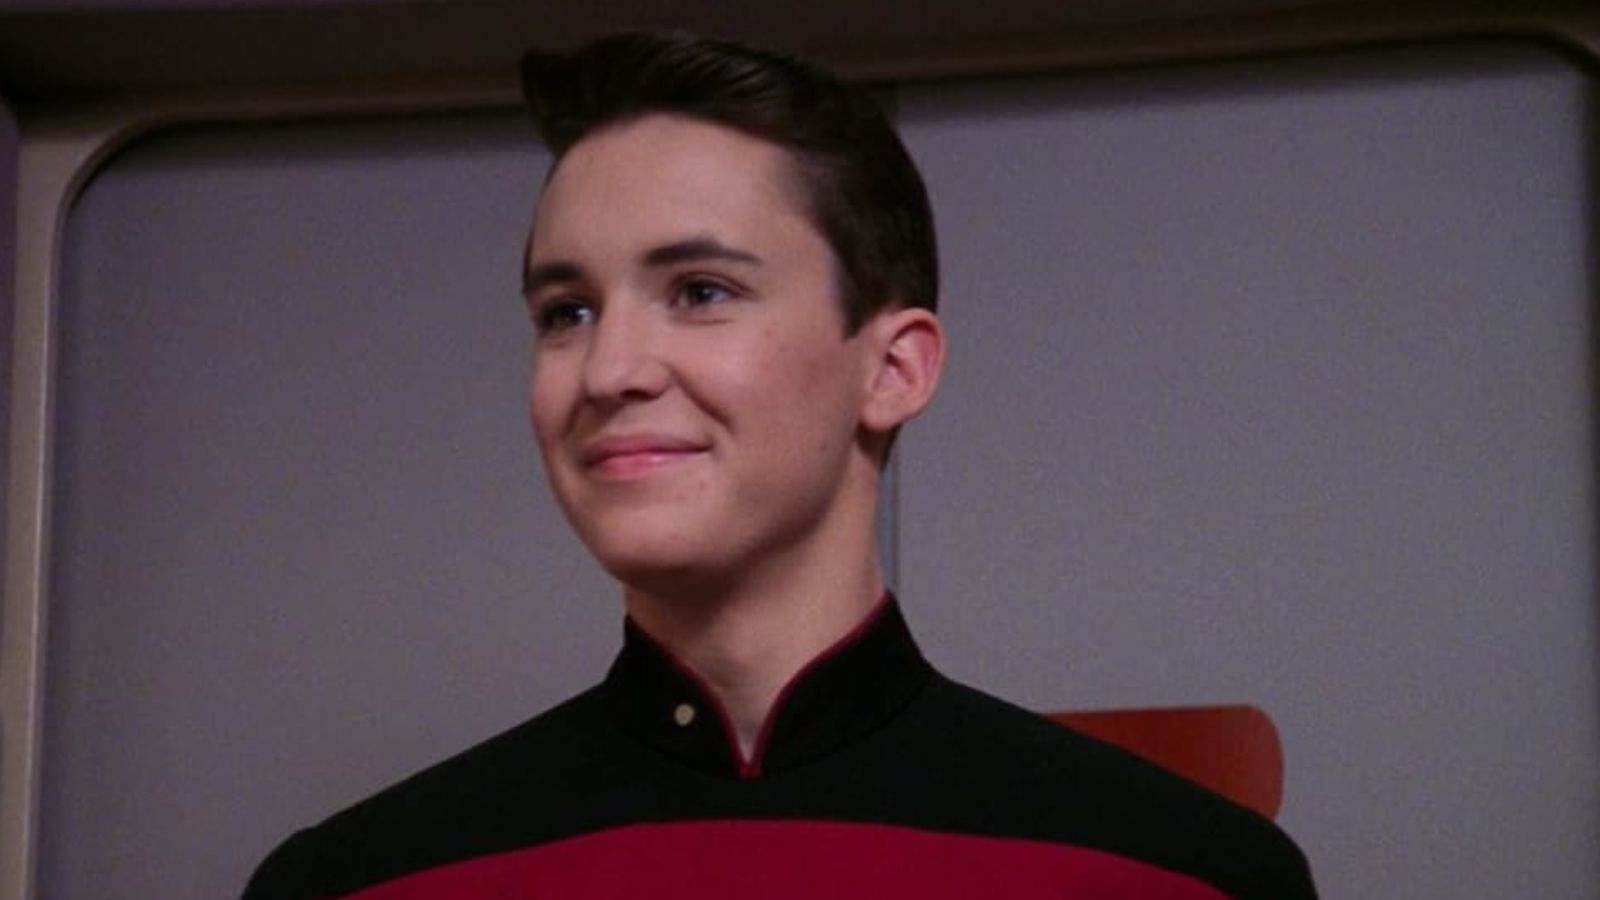 <span>The teenage nerd who could solve anything, and his incessant problem-solving quickly made him one of the </span><a class="editor-rtfLink" href="https://gamerant.com/star-trek-characters-wil-wheaton-wesley-crusher-hate-explained/#:~:text=Wesley%20Crusher%2C%20the%20boy%20genius,to%20children%20in%20the%20audience." rel="noopener"><span>most hated characters</span></a><span>. He was also far too much of an overachiever to represent teenagers as was intended. How many sixteen-year-olds do you know who have logistical space dilemmas?</span>